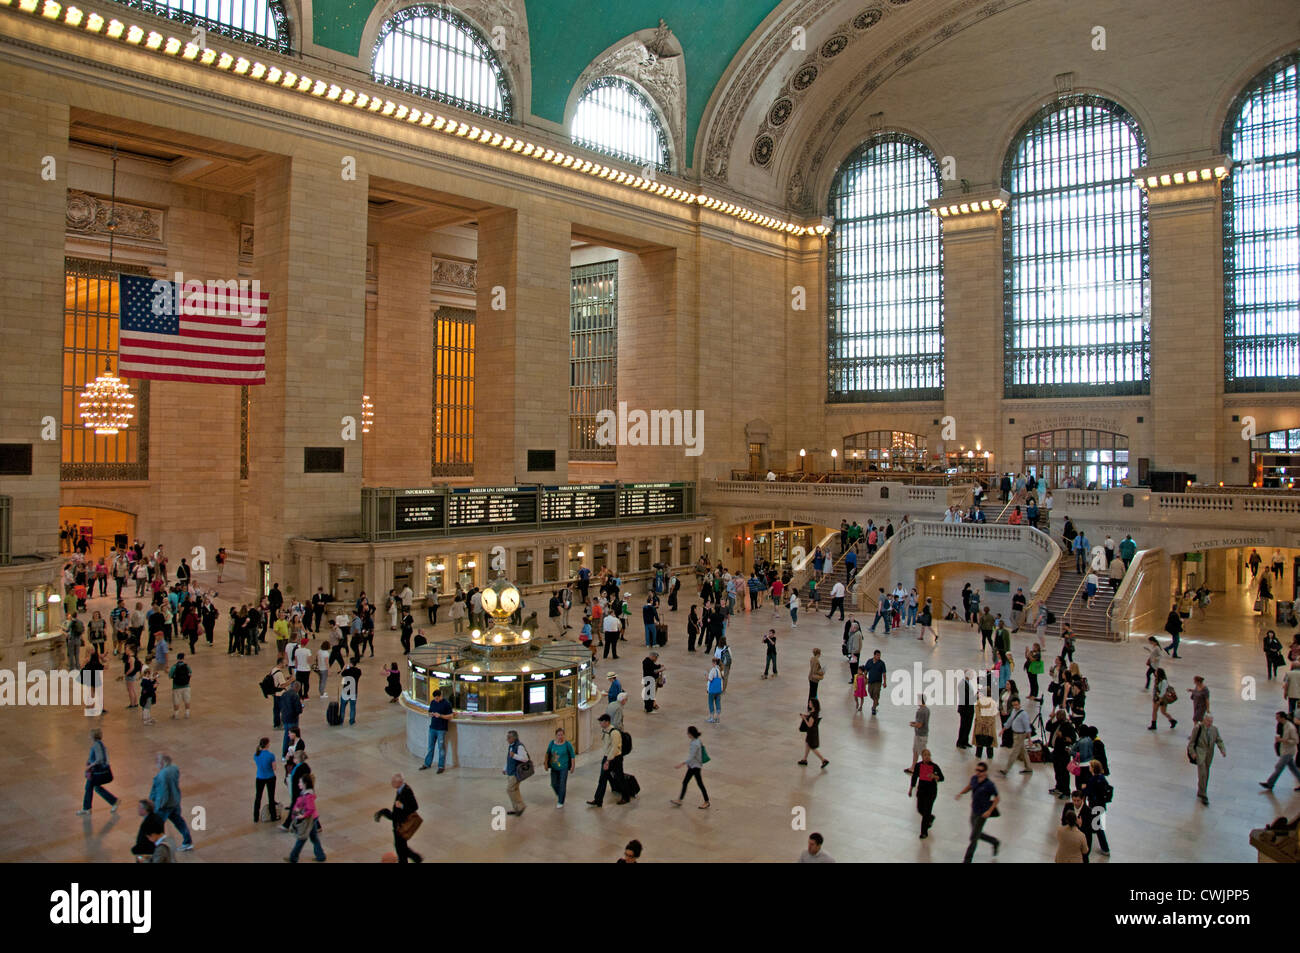 Grand Central Terminal, Grand Central Station, Grand Central, terminal dei treni per pendolari situato in 42nd Street e Park Avenue, Manhattan, New York City. Foto Stock